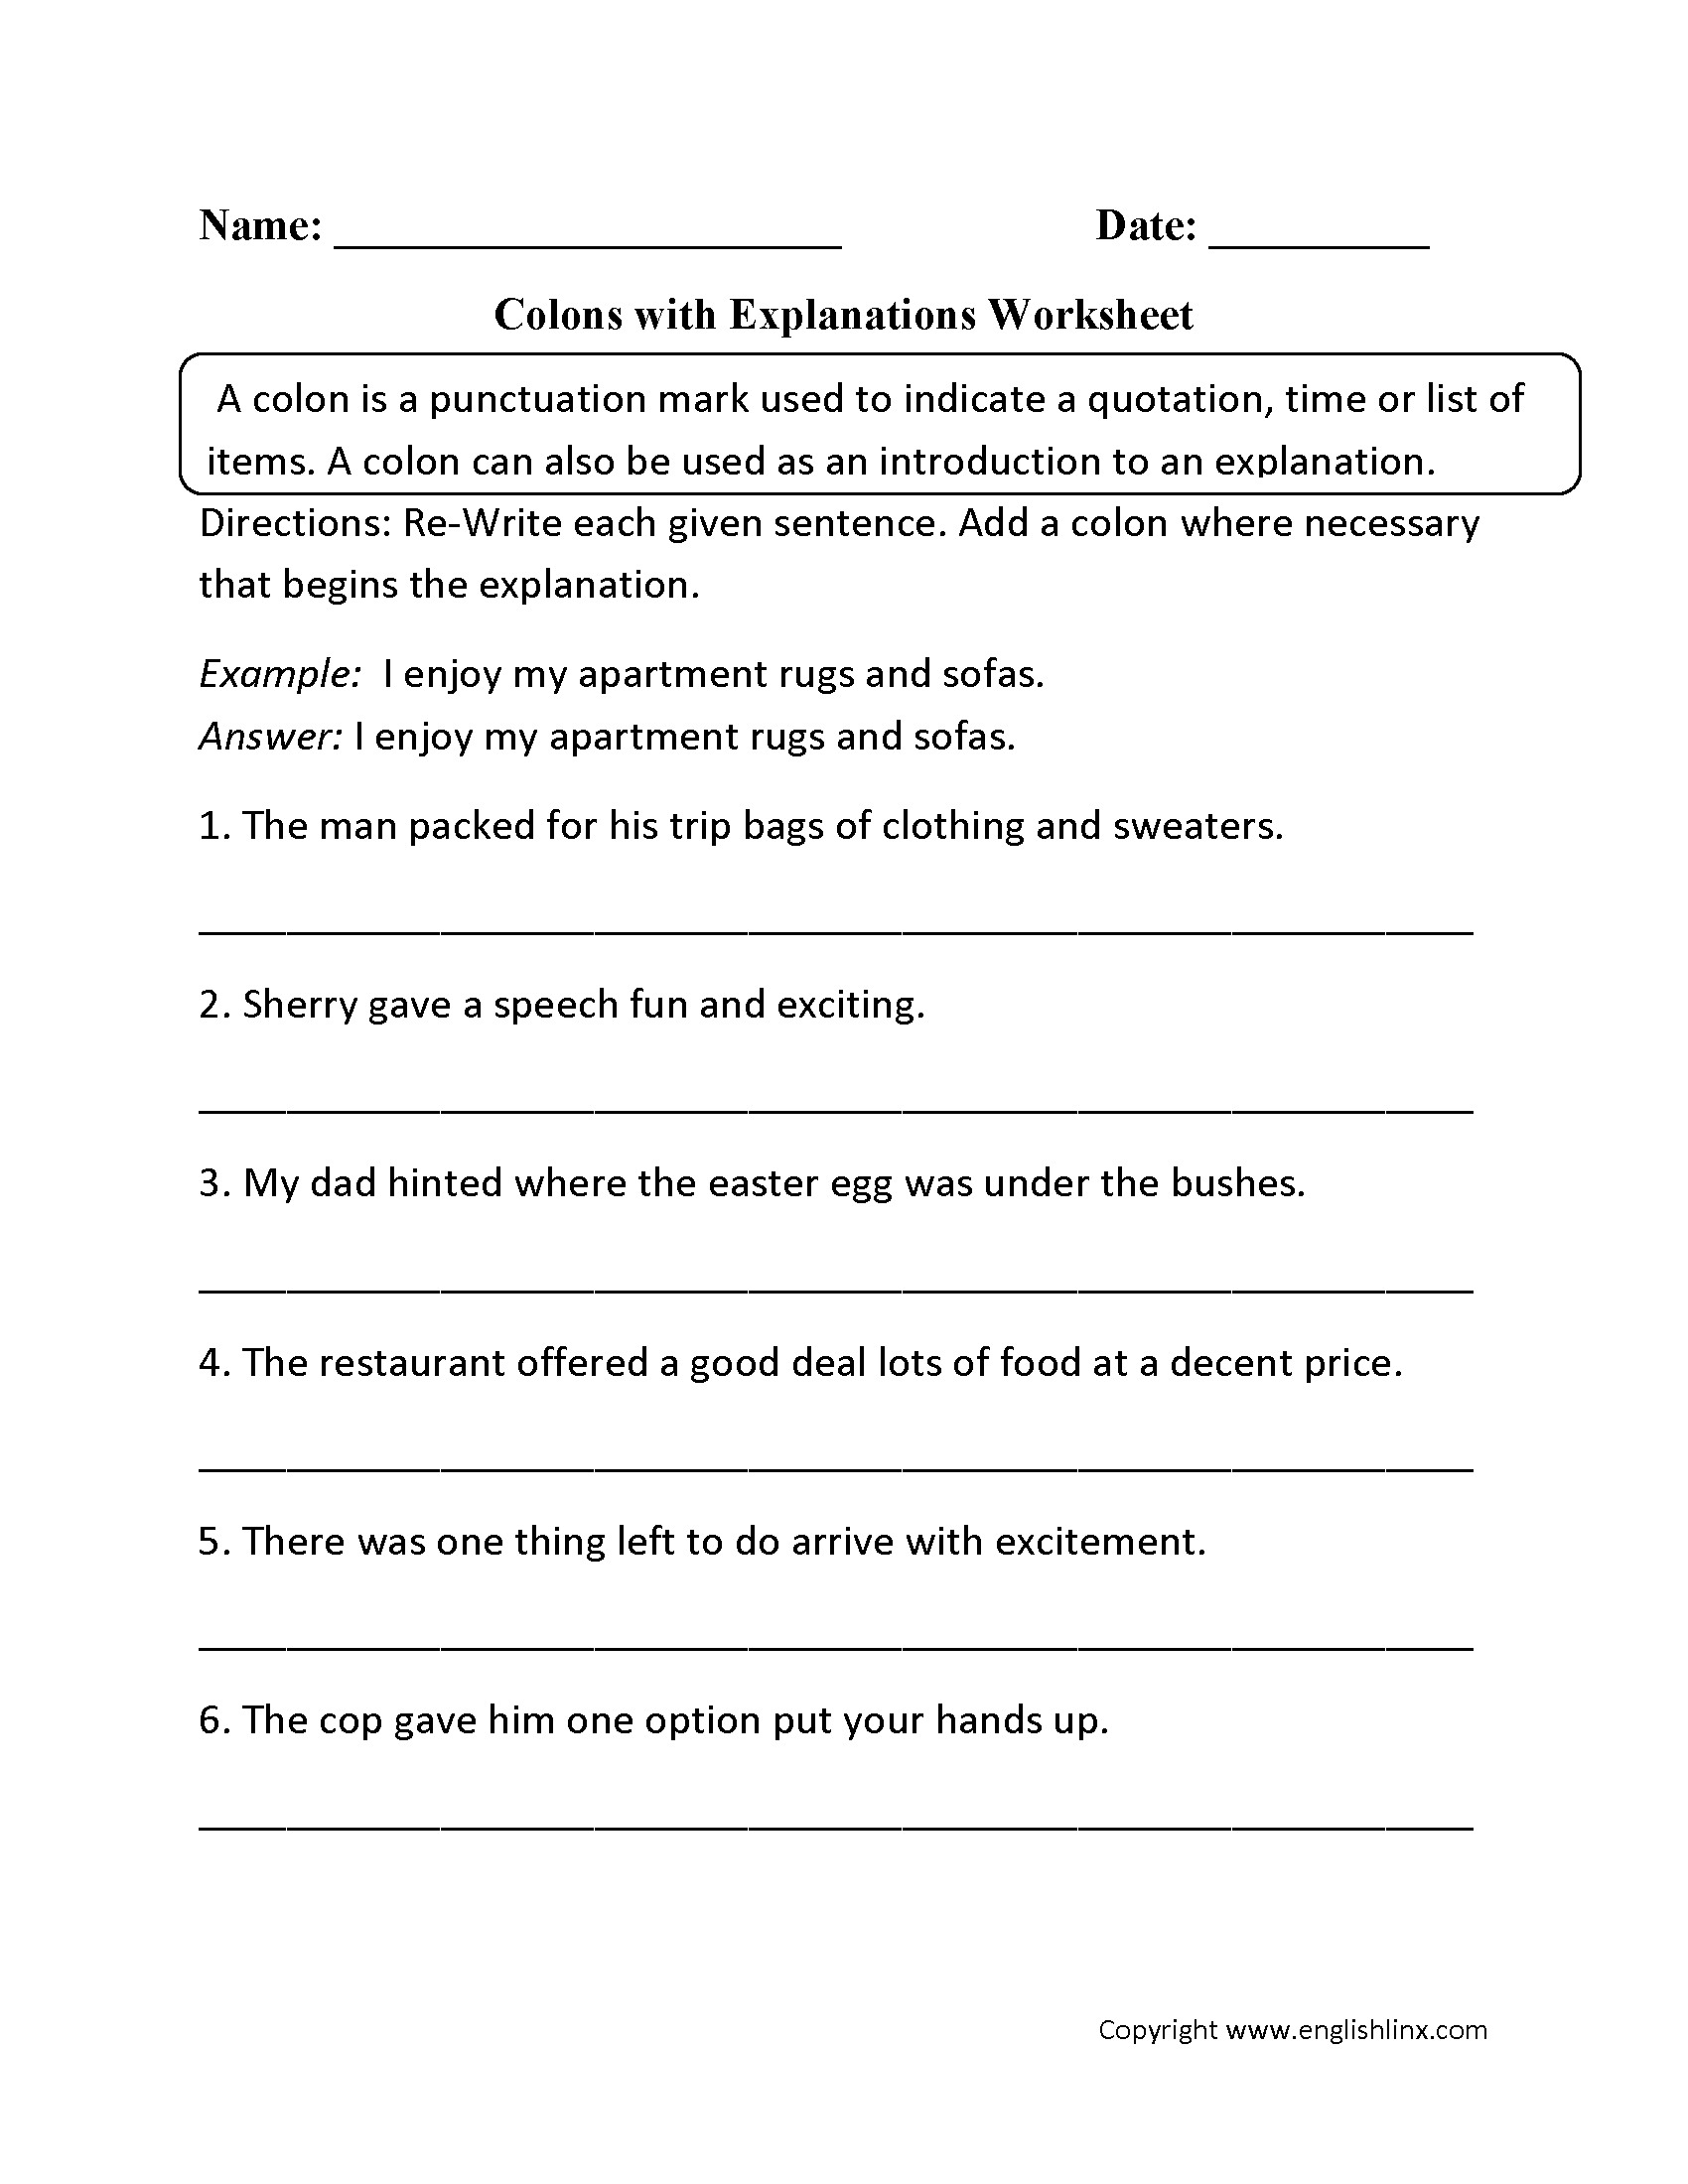 Colon with Explanations Worksheets